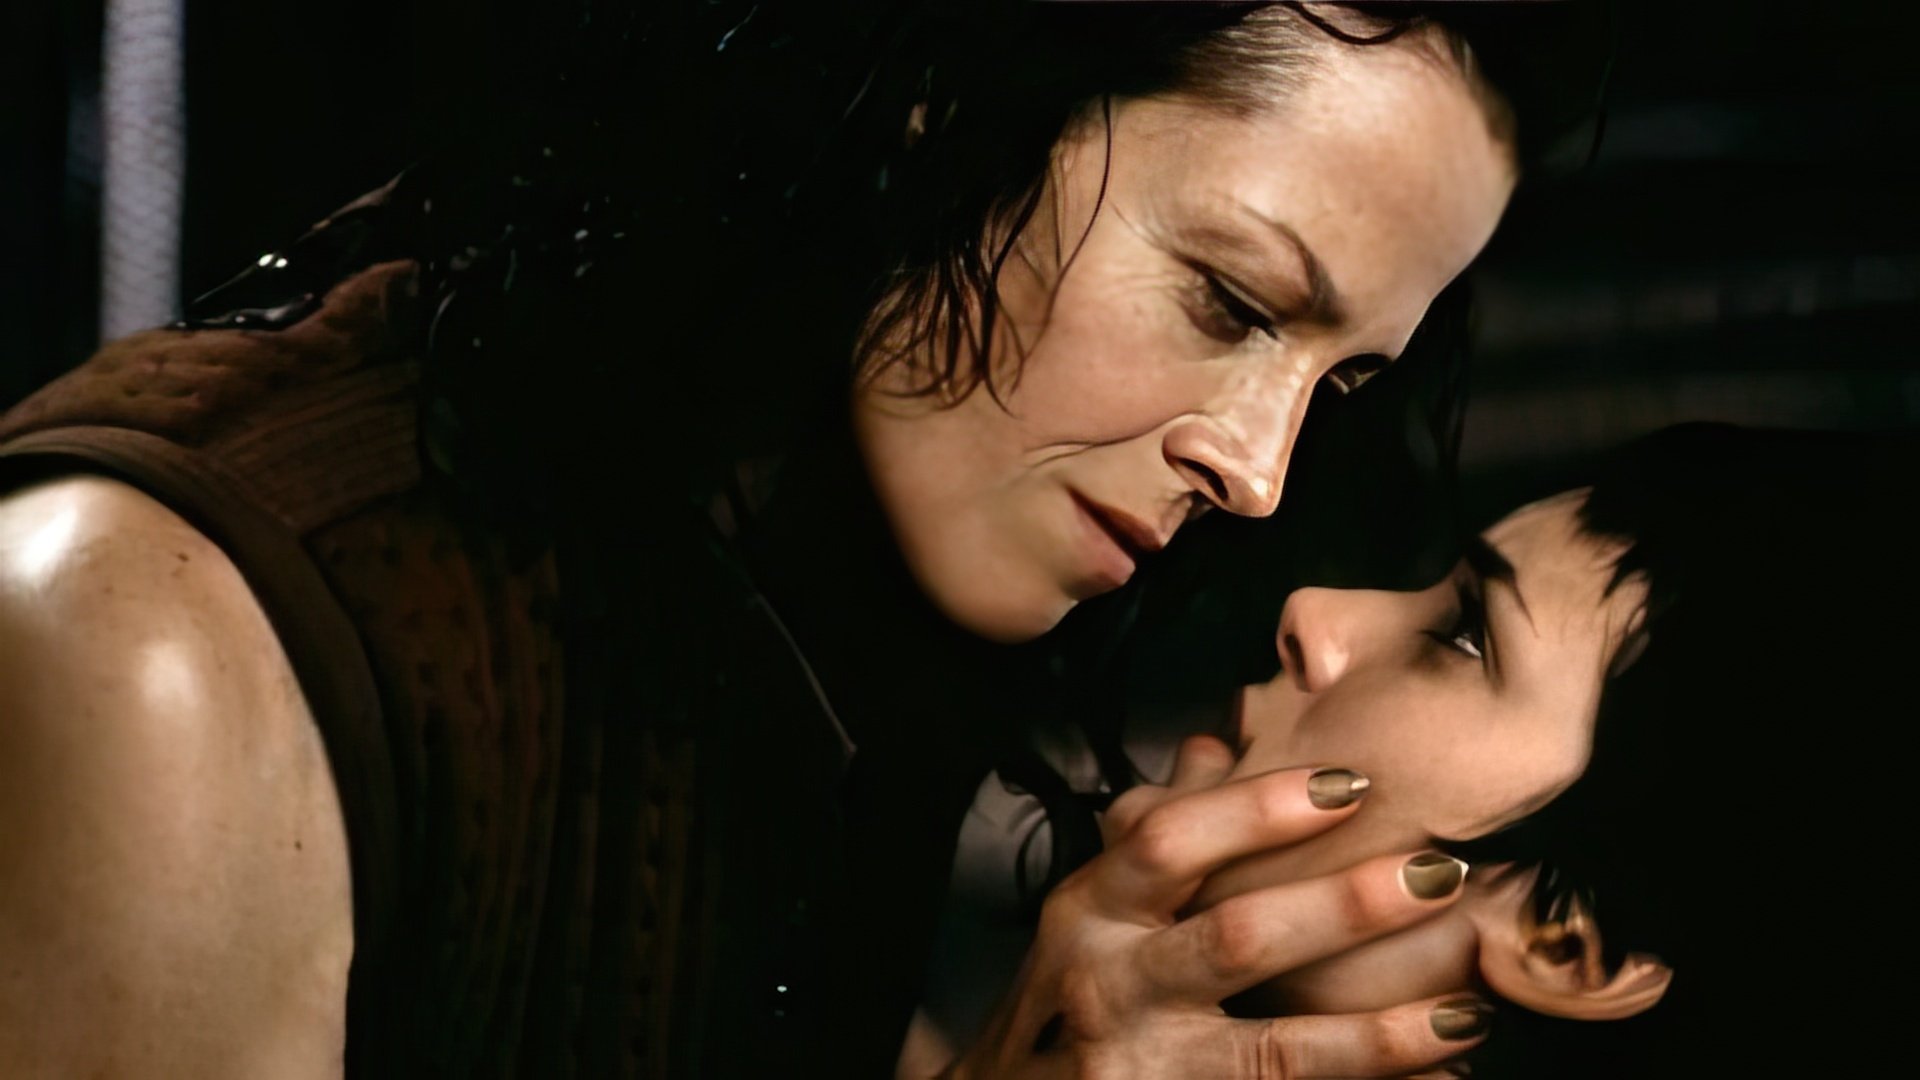 Winona Ryder and Sigourney Weaver during Alien: Resurrection filming